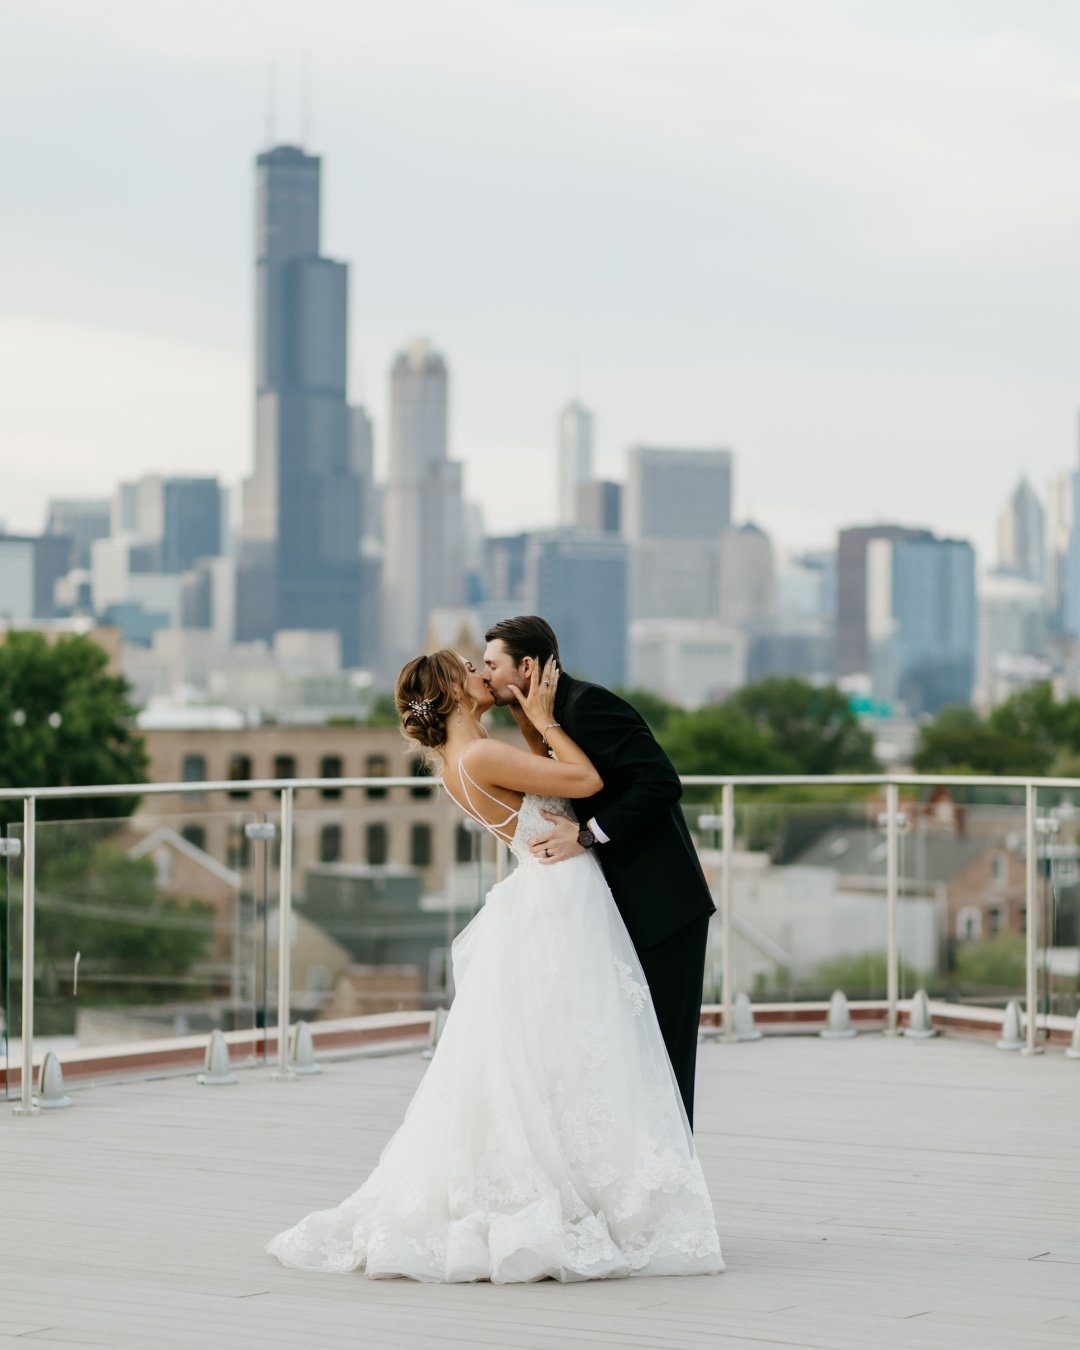 Kiss me on top of a Chicago rooftop on a warm summer day 😘💕

📸 @larapucciphoto
.
.
.
#lacunaevents #lacunalofts #chicagoeventvenue #chicagowedding #rooftopwedding #weddingphotography #ChicagoWeddings #ChicagoEvents #brideinspiration #huffpostweddi